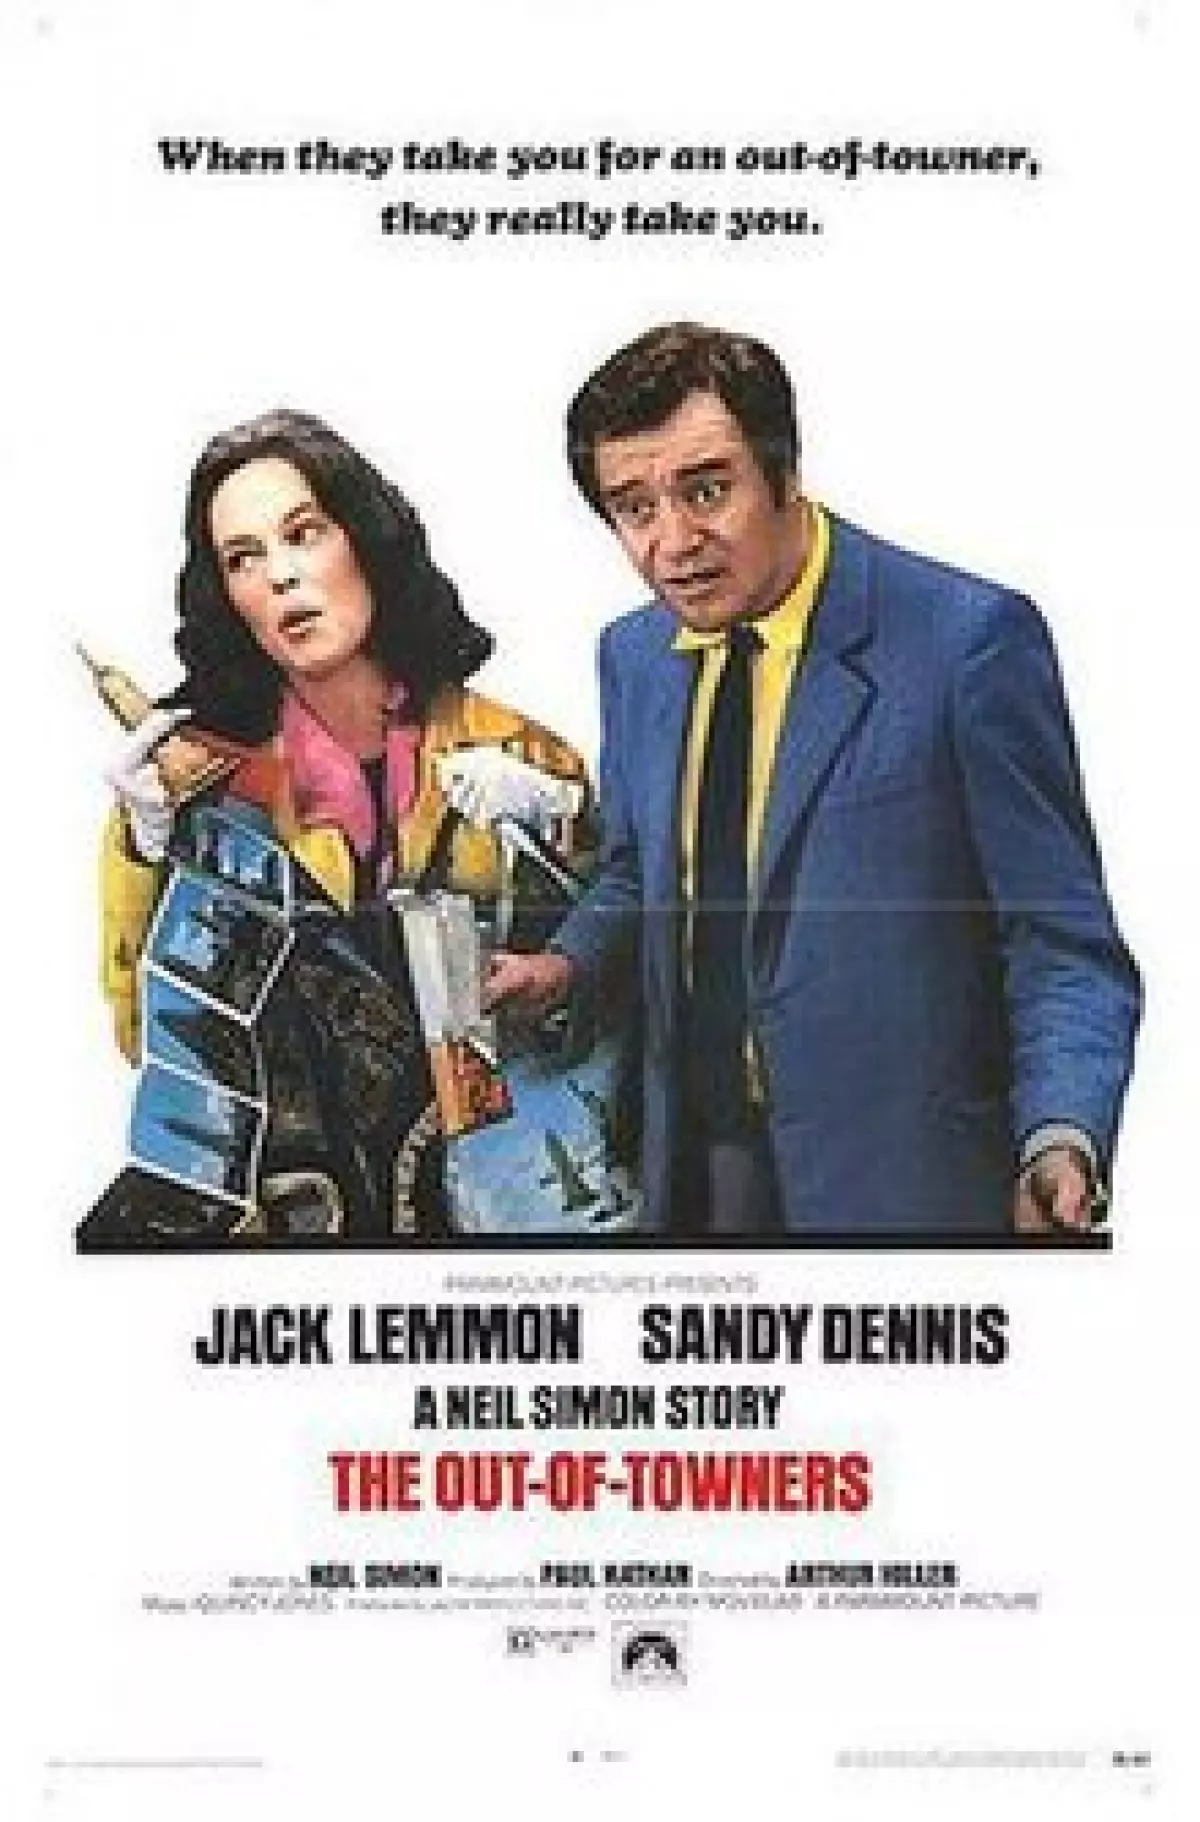 The Out-of-Towners (1970 film)